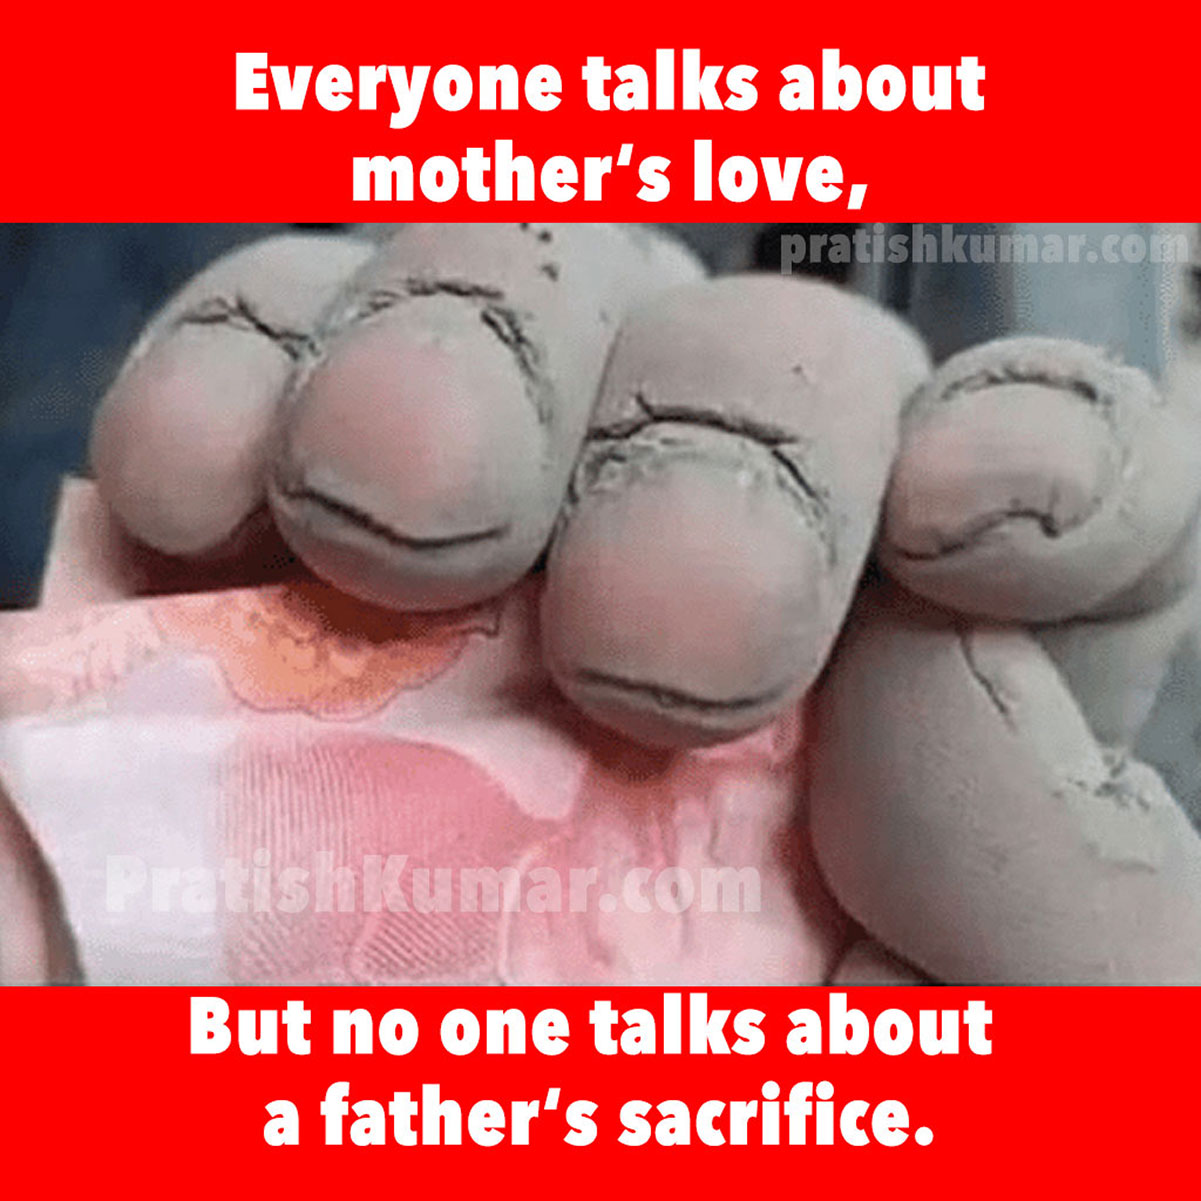 Everybody talks about mother's love nobody talks about father's sacrifice - Inspirational Image